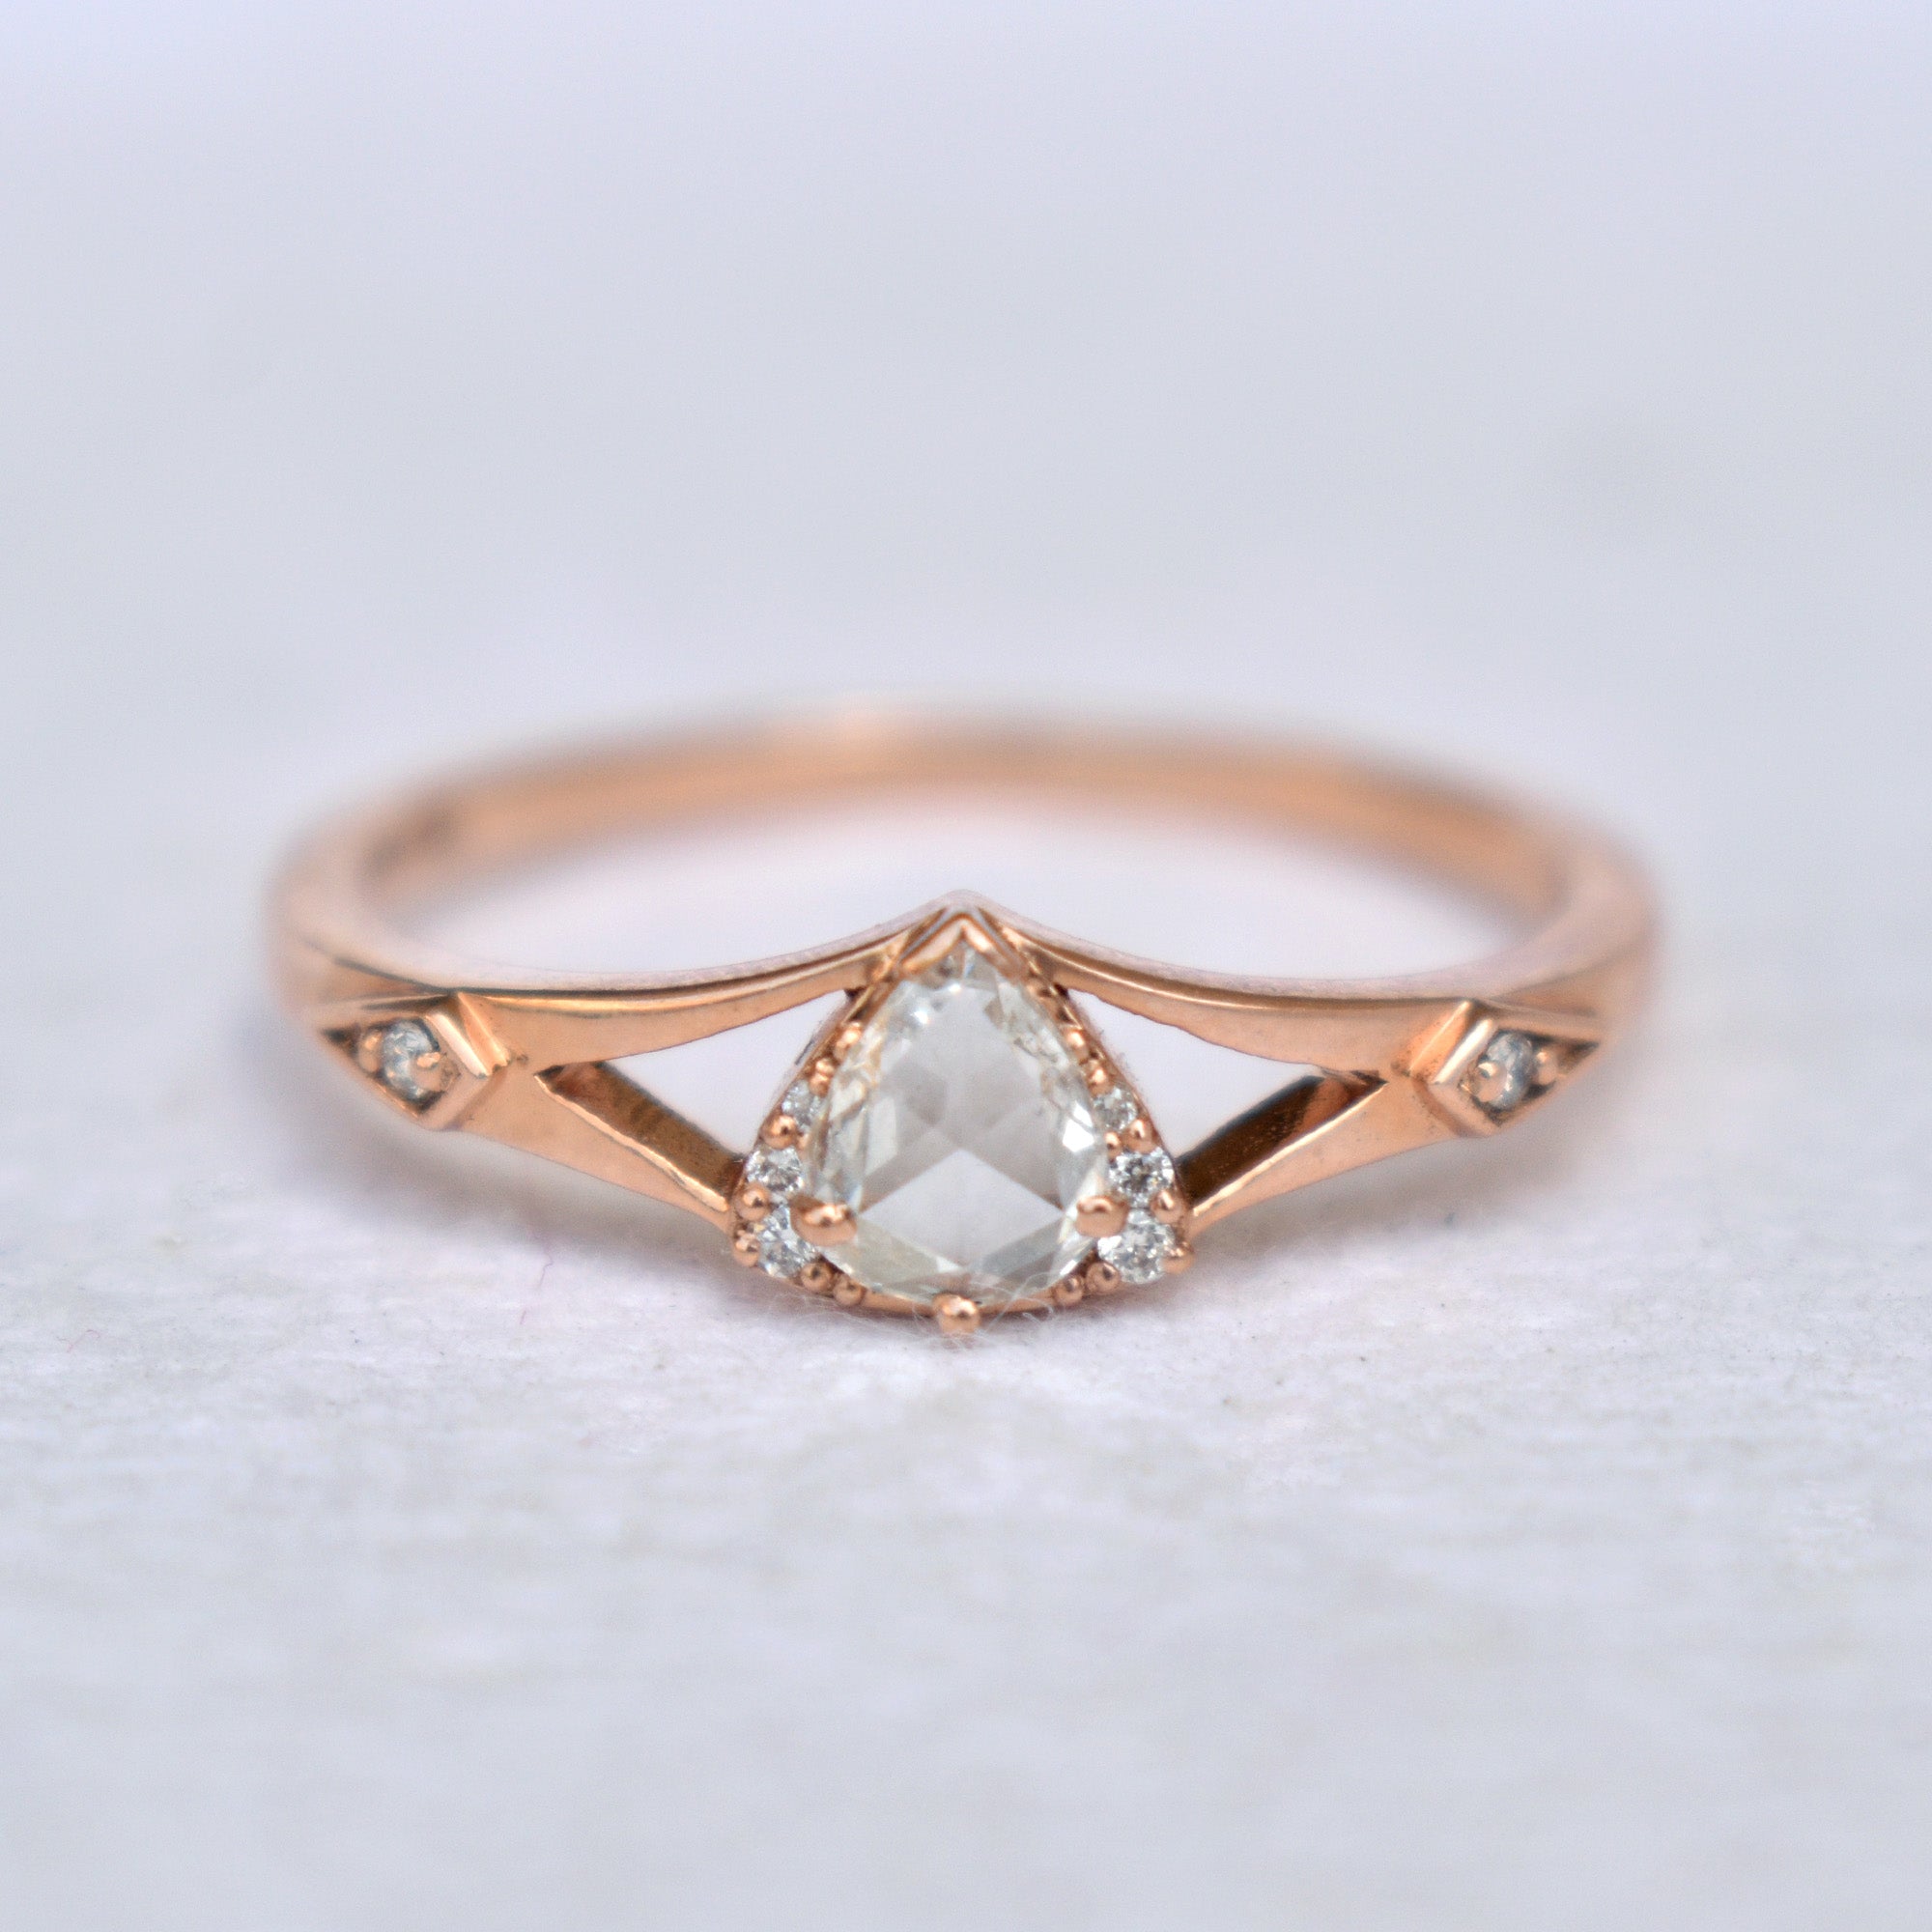 Pear Rose Cut Diamond Ring with Illusion Triangle in 14K Rose Gold Pear Engagement Ring